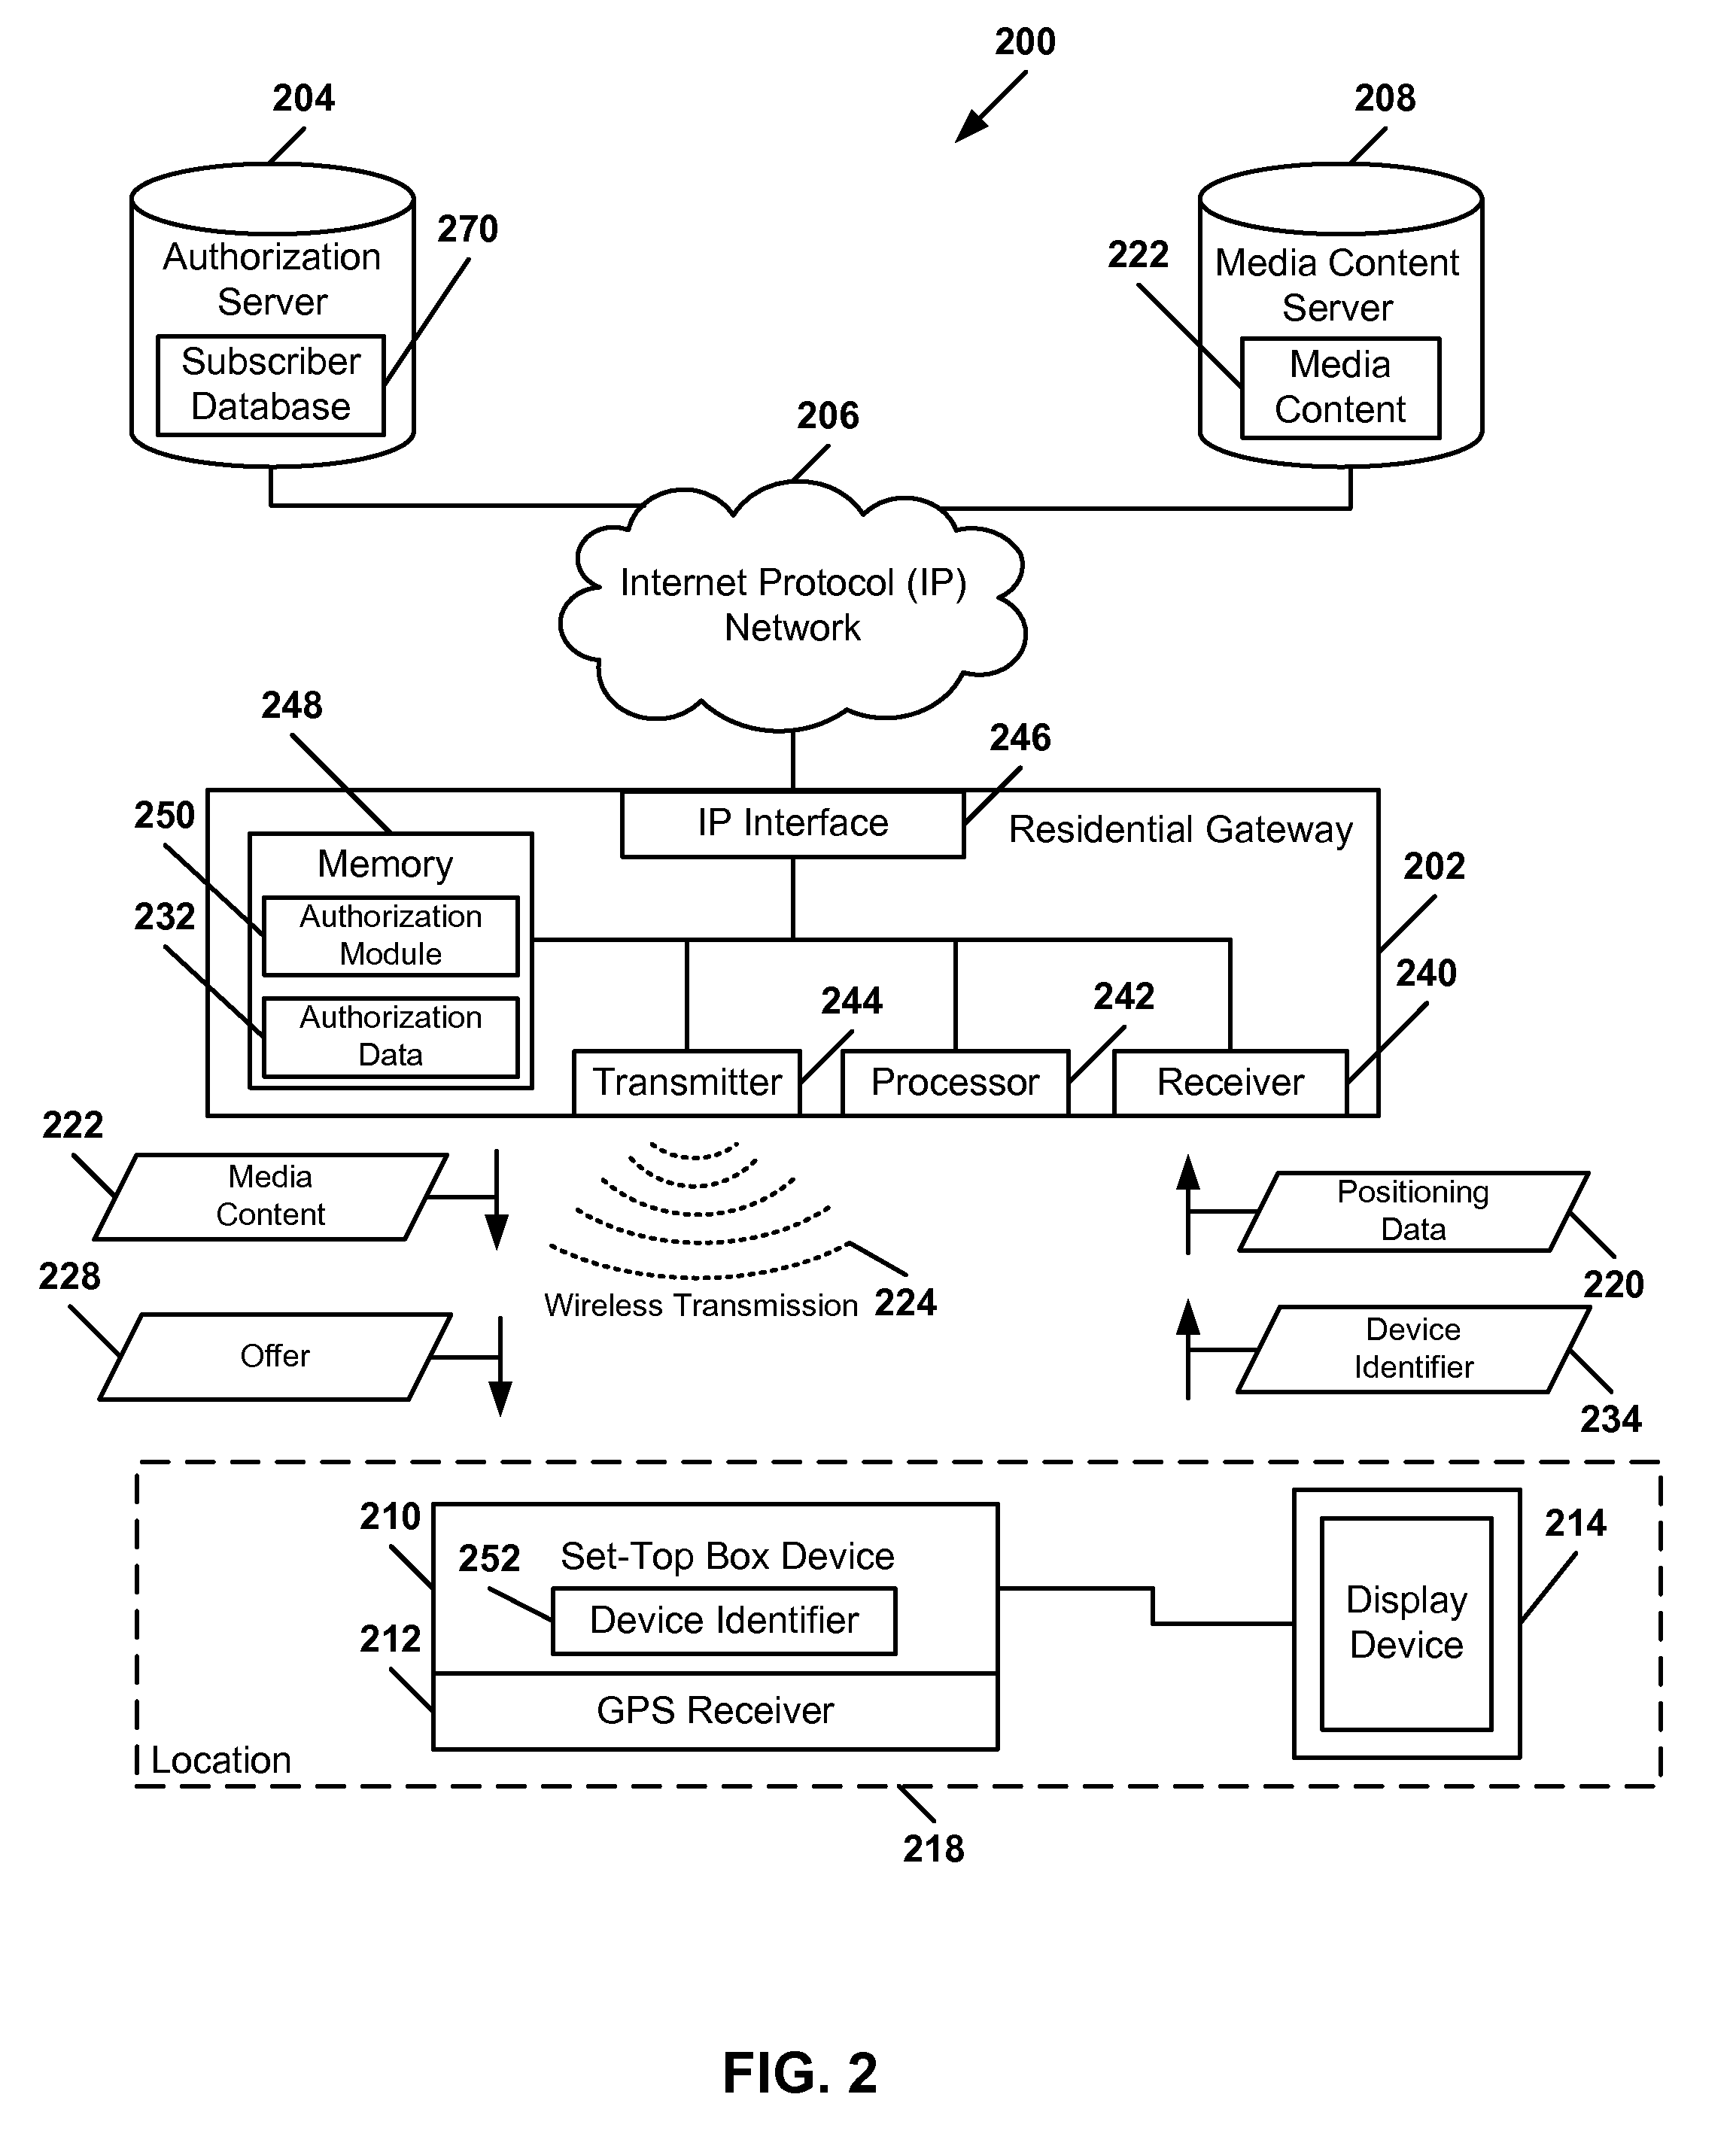 System and Method to Determine an Authorization of a Wireless Set-Top Box Device to Receive Media Content